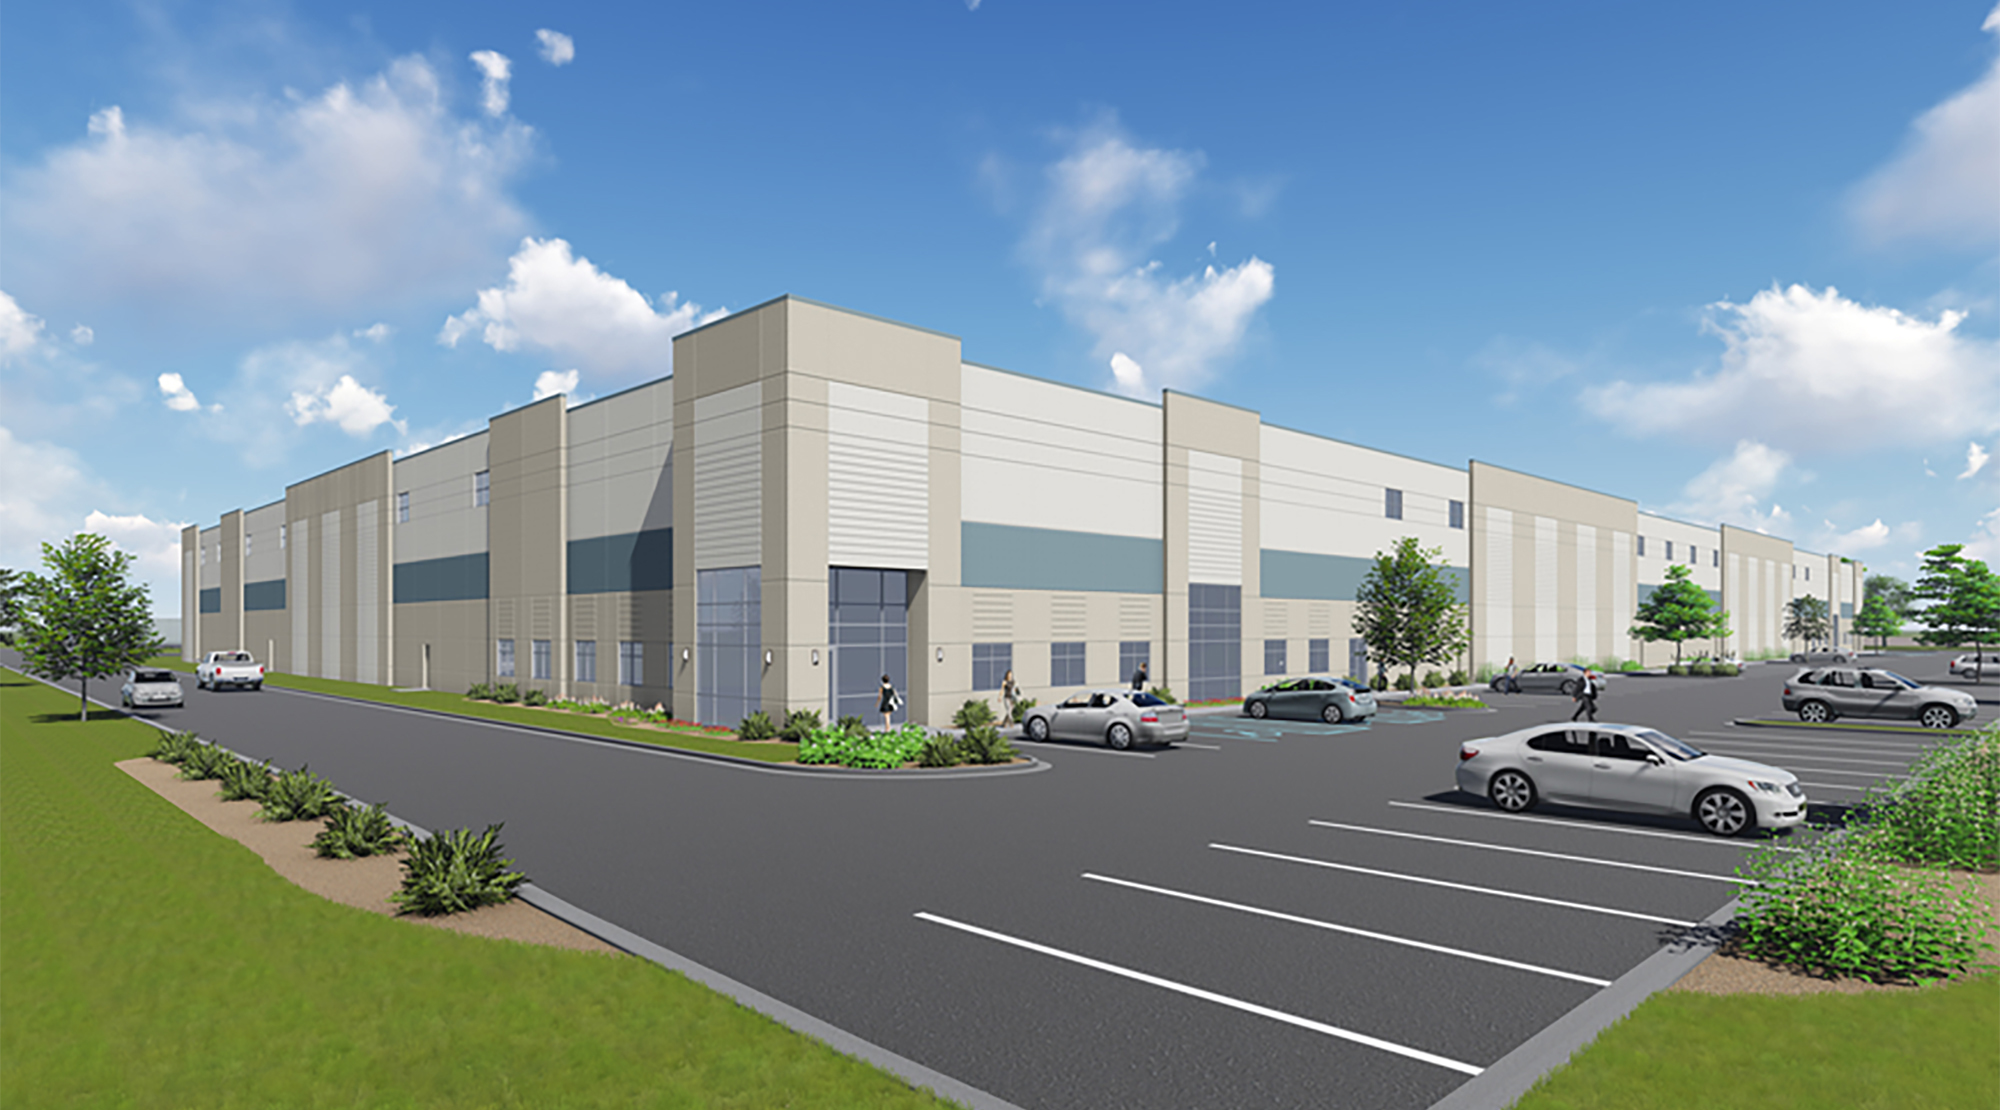 Pattillo Industrial Real Estate applied to lay the foundation for a speculative warehouse.